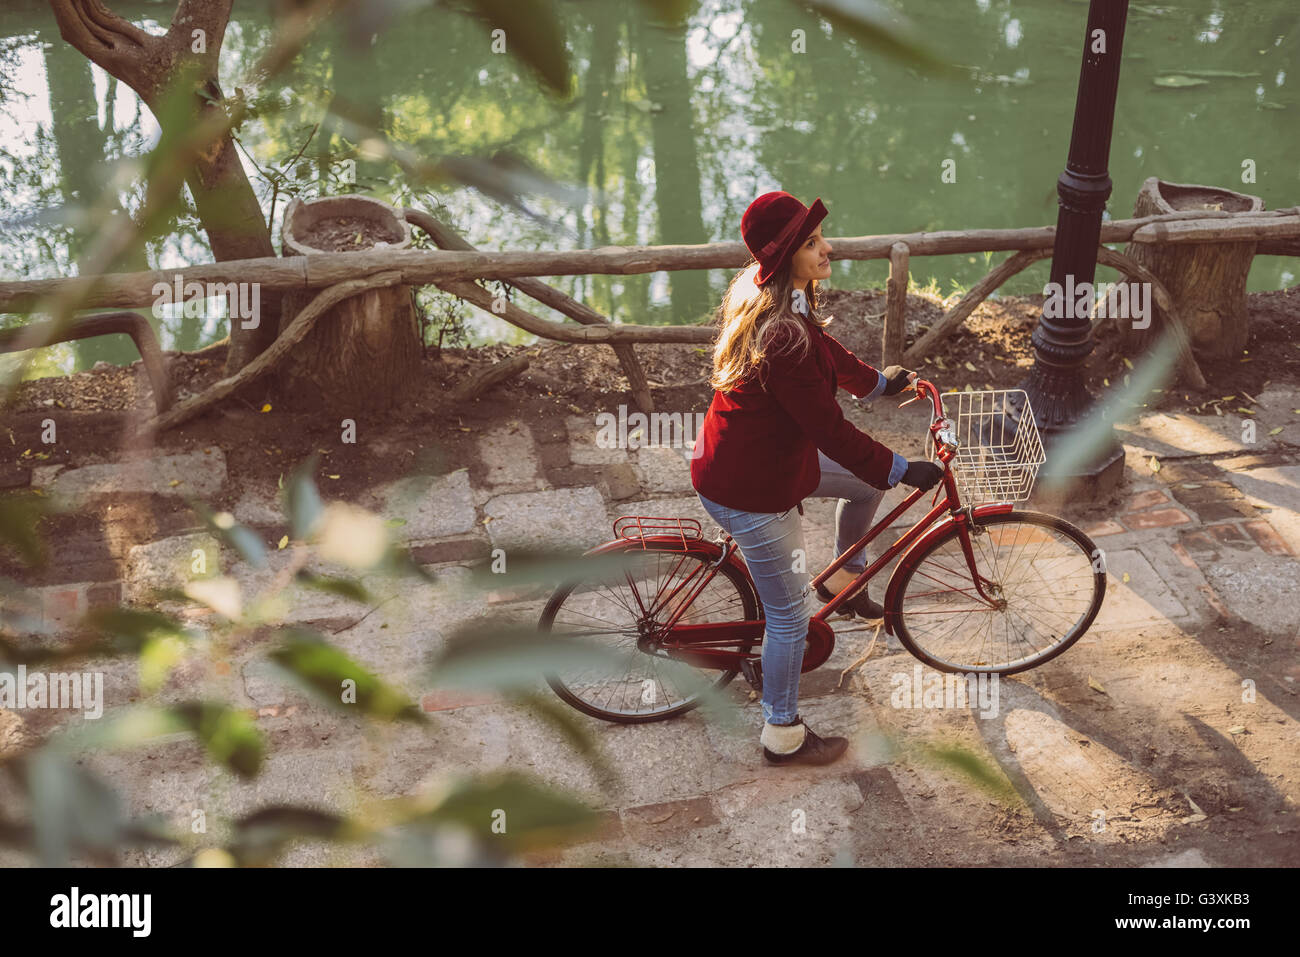 High angle view of happy girl riding bike at park in vintage urban fashion, nature scenery background. Stock Photo